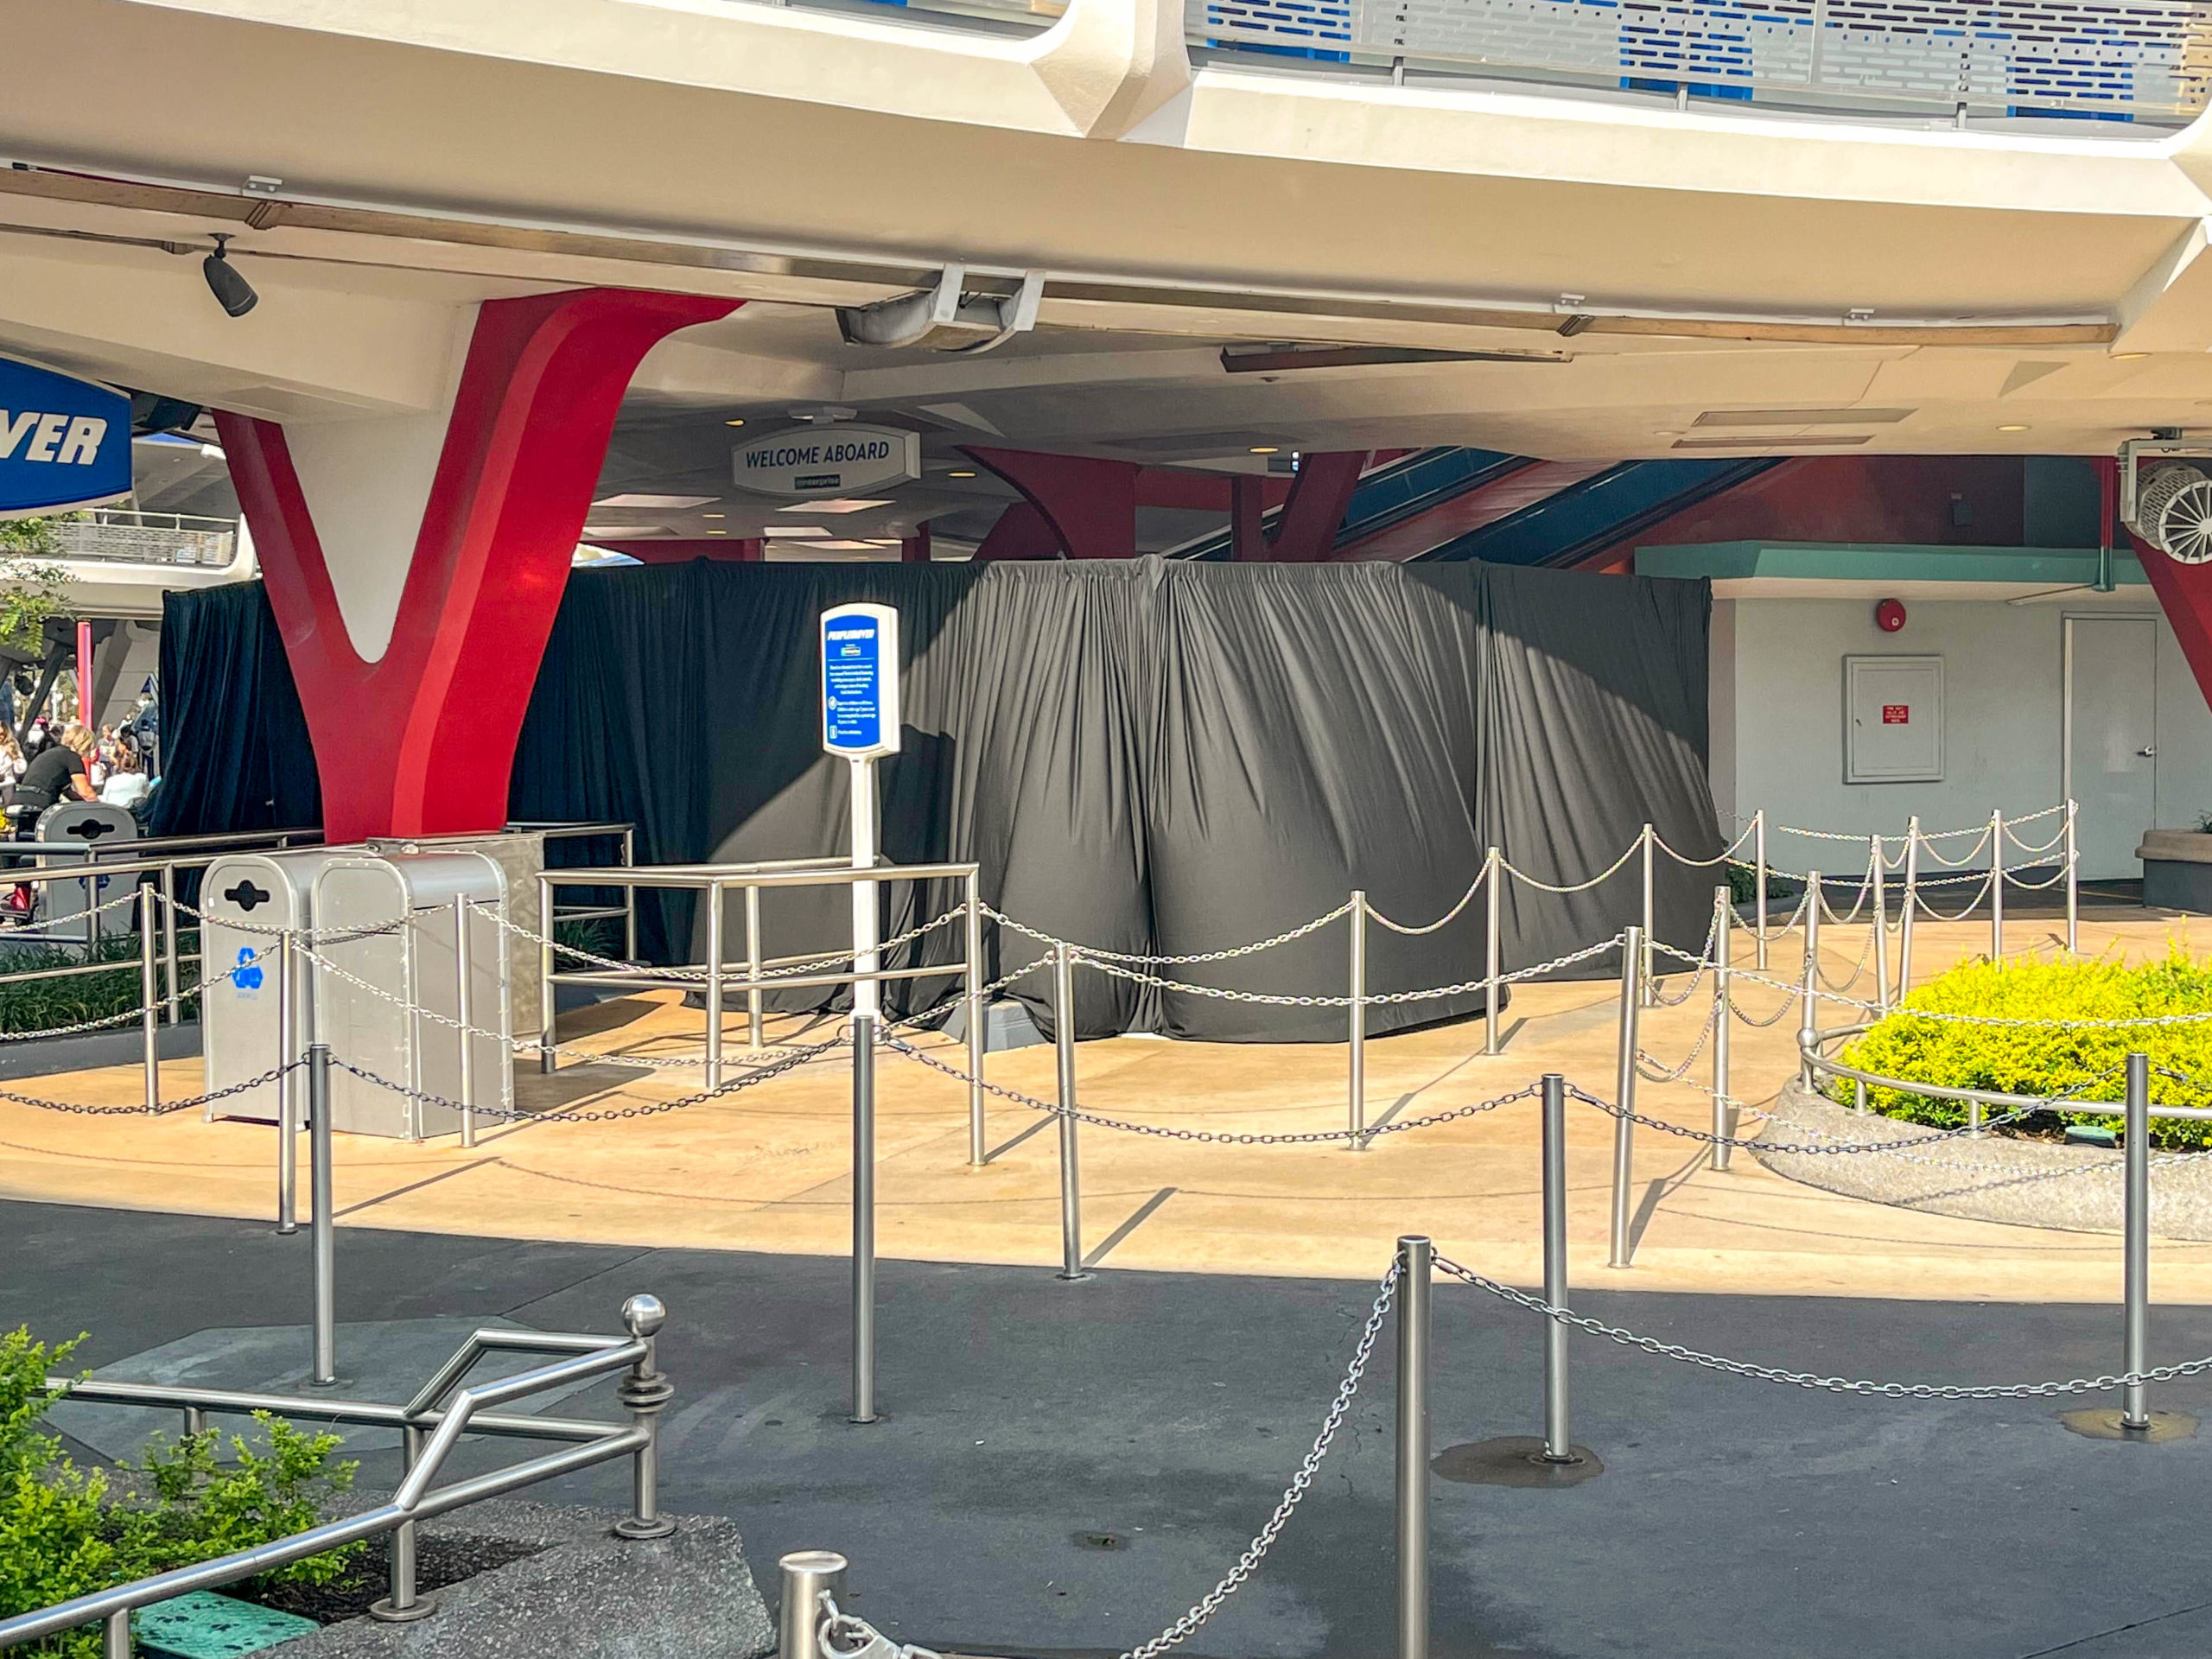 PeopleMover closed